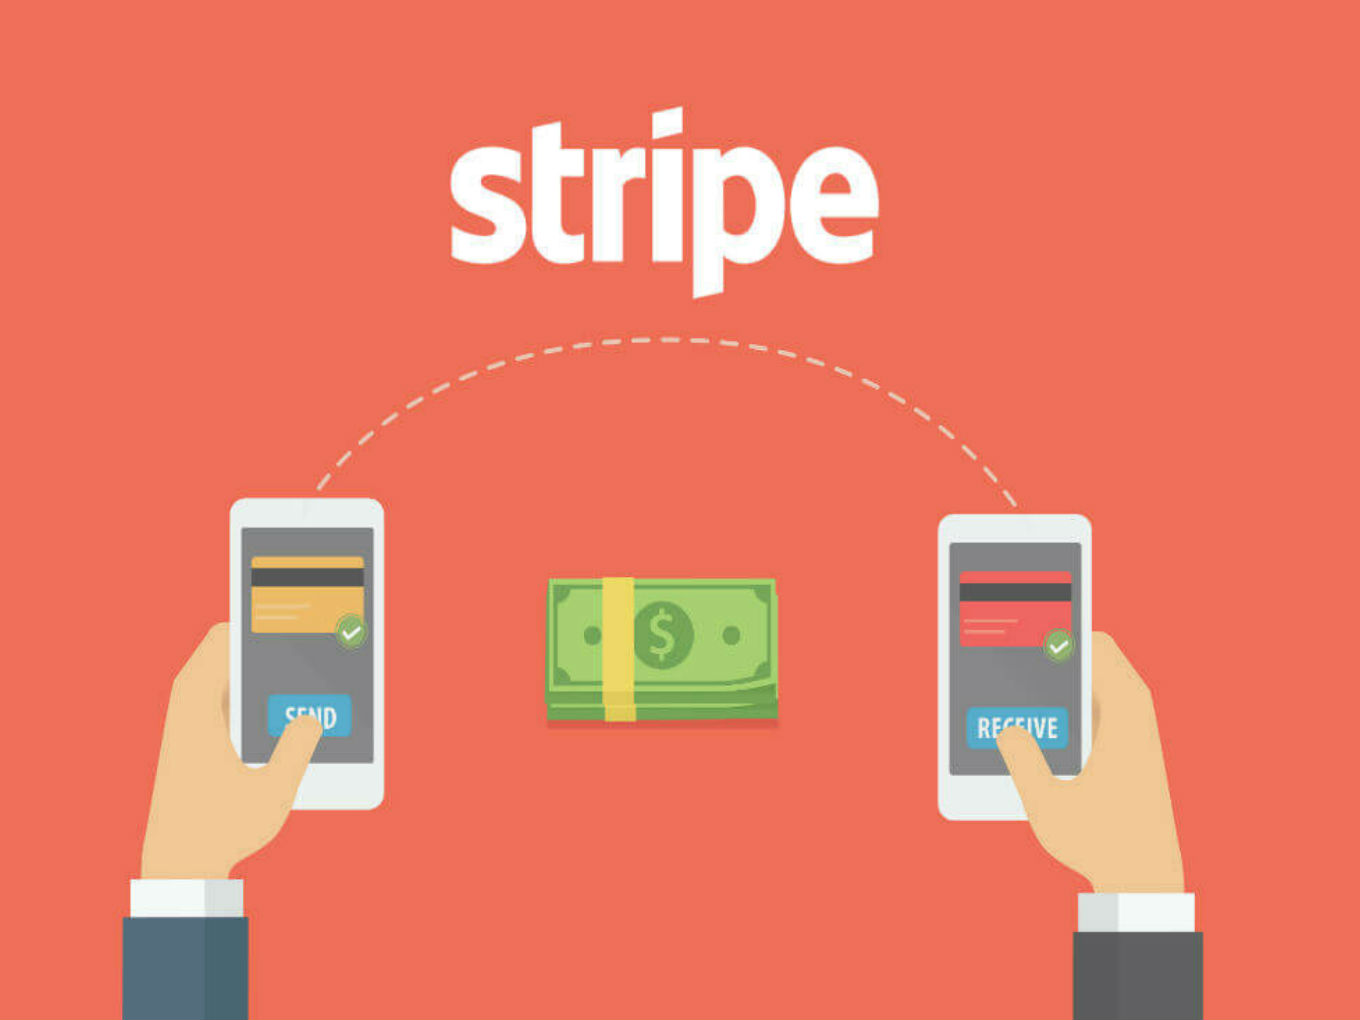 Stripe Eyes India Expansion With Latest $245 Mn Fund Raise At $20 Bn Valuation